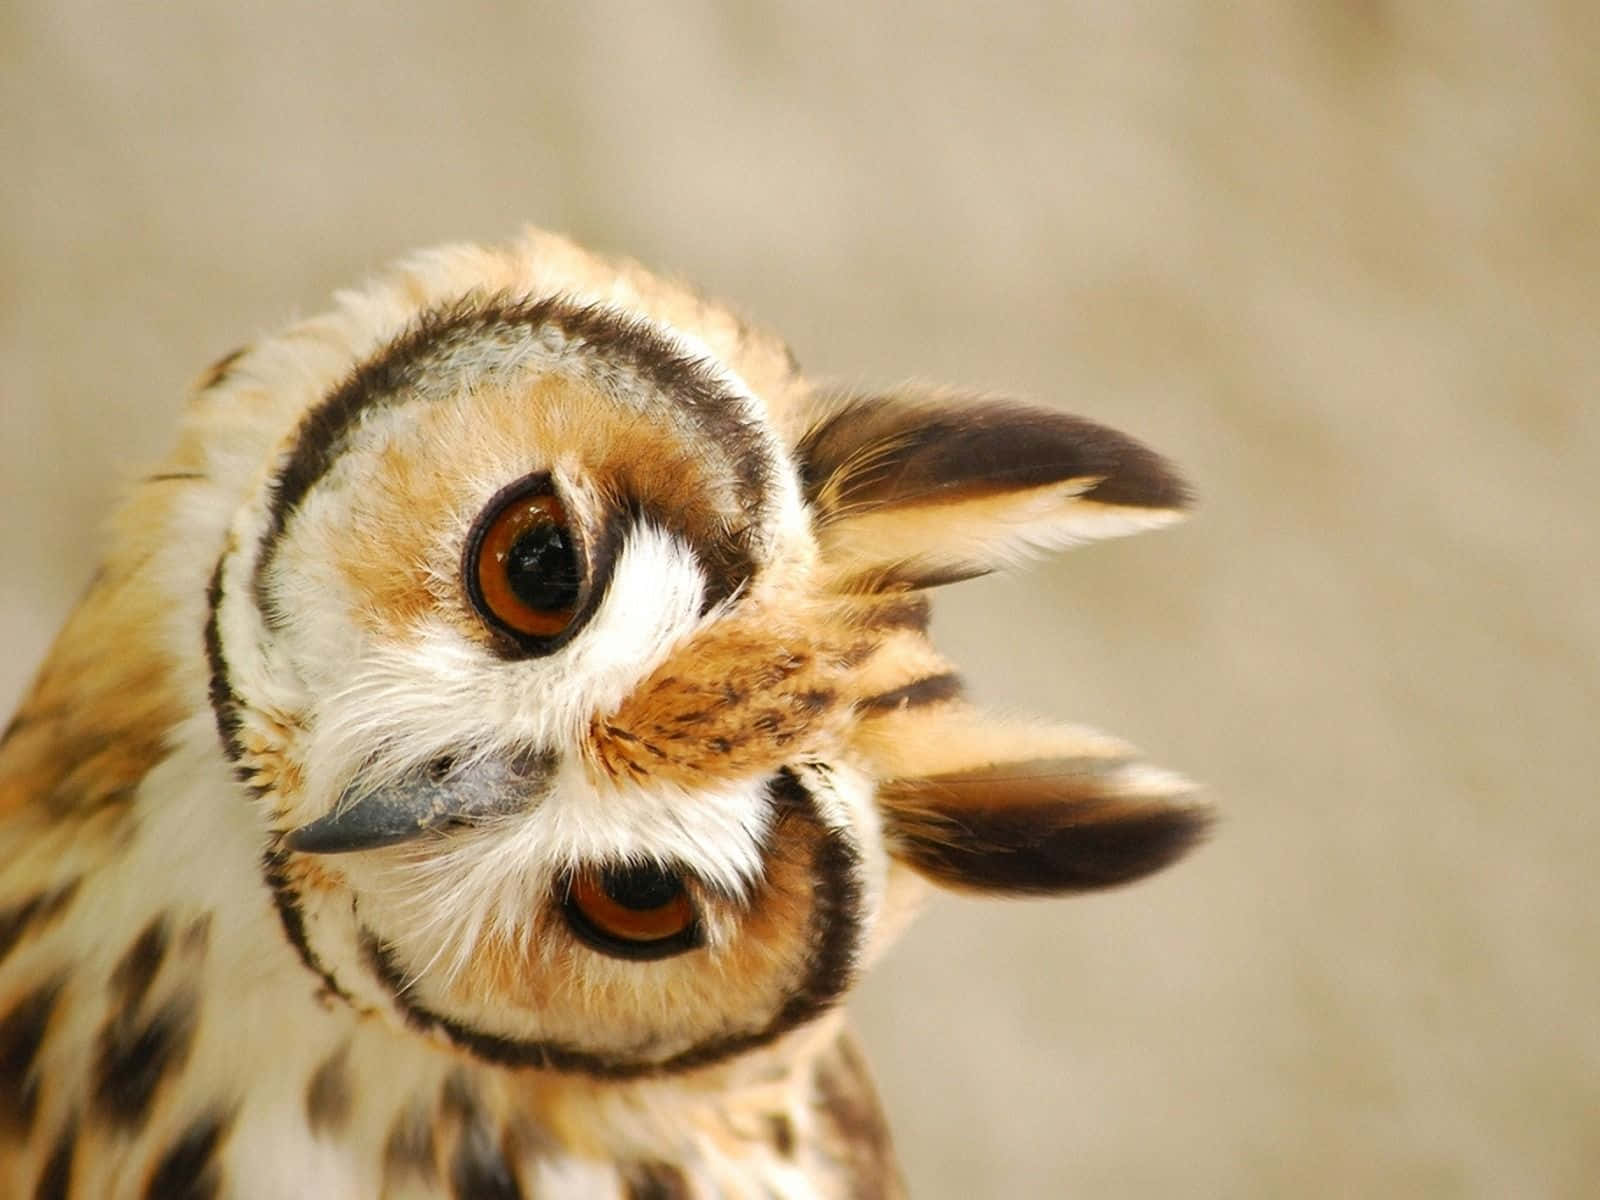 A Cute Owl with Big Eyes Looking into the Camera